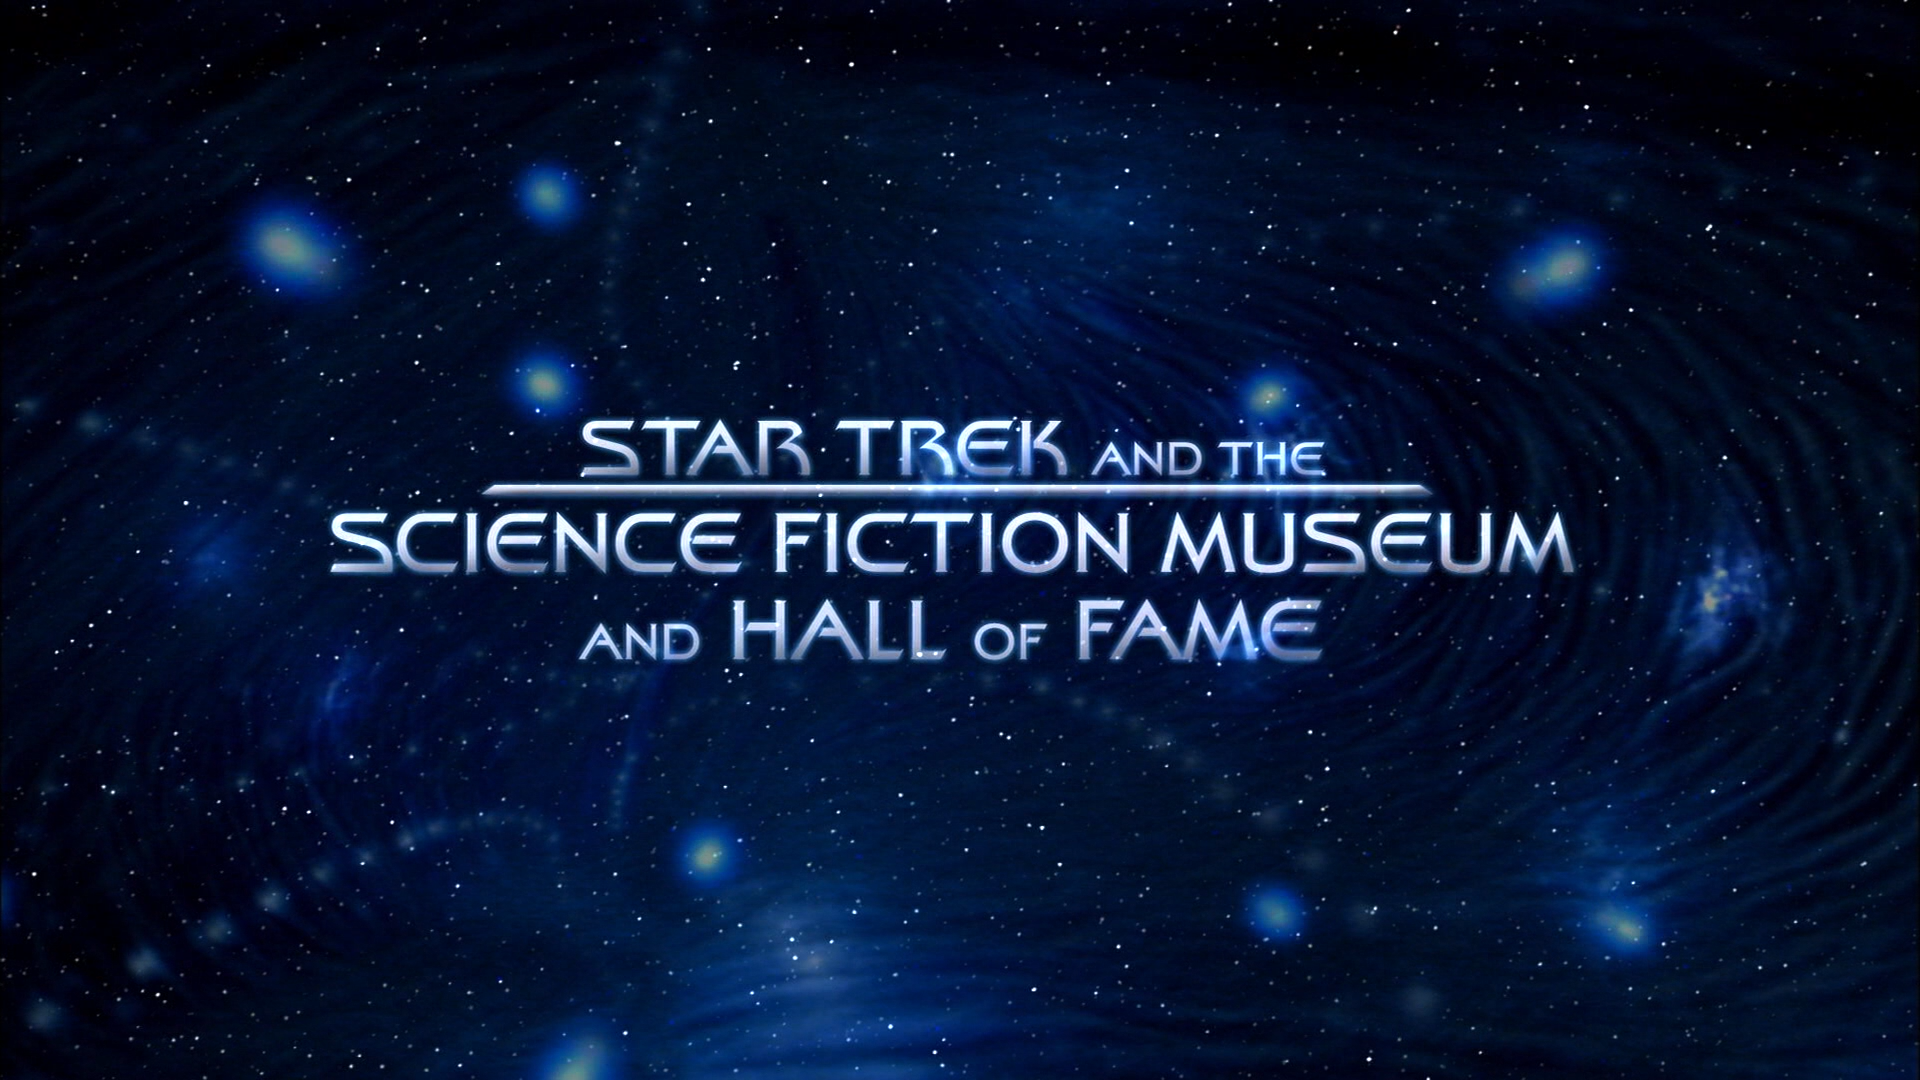 "Star Trek and the Science Fiction Museum and Hall of Fame" featurette